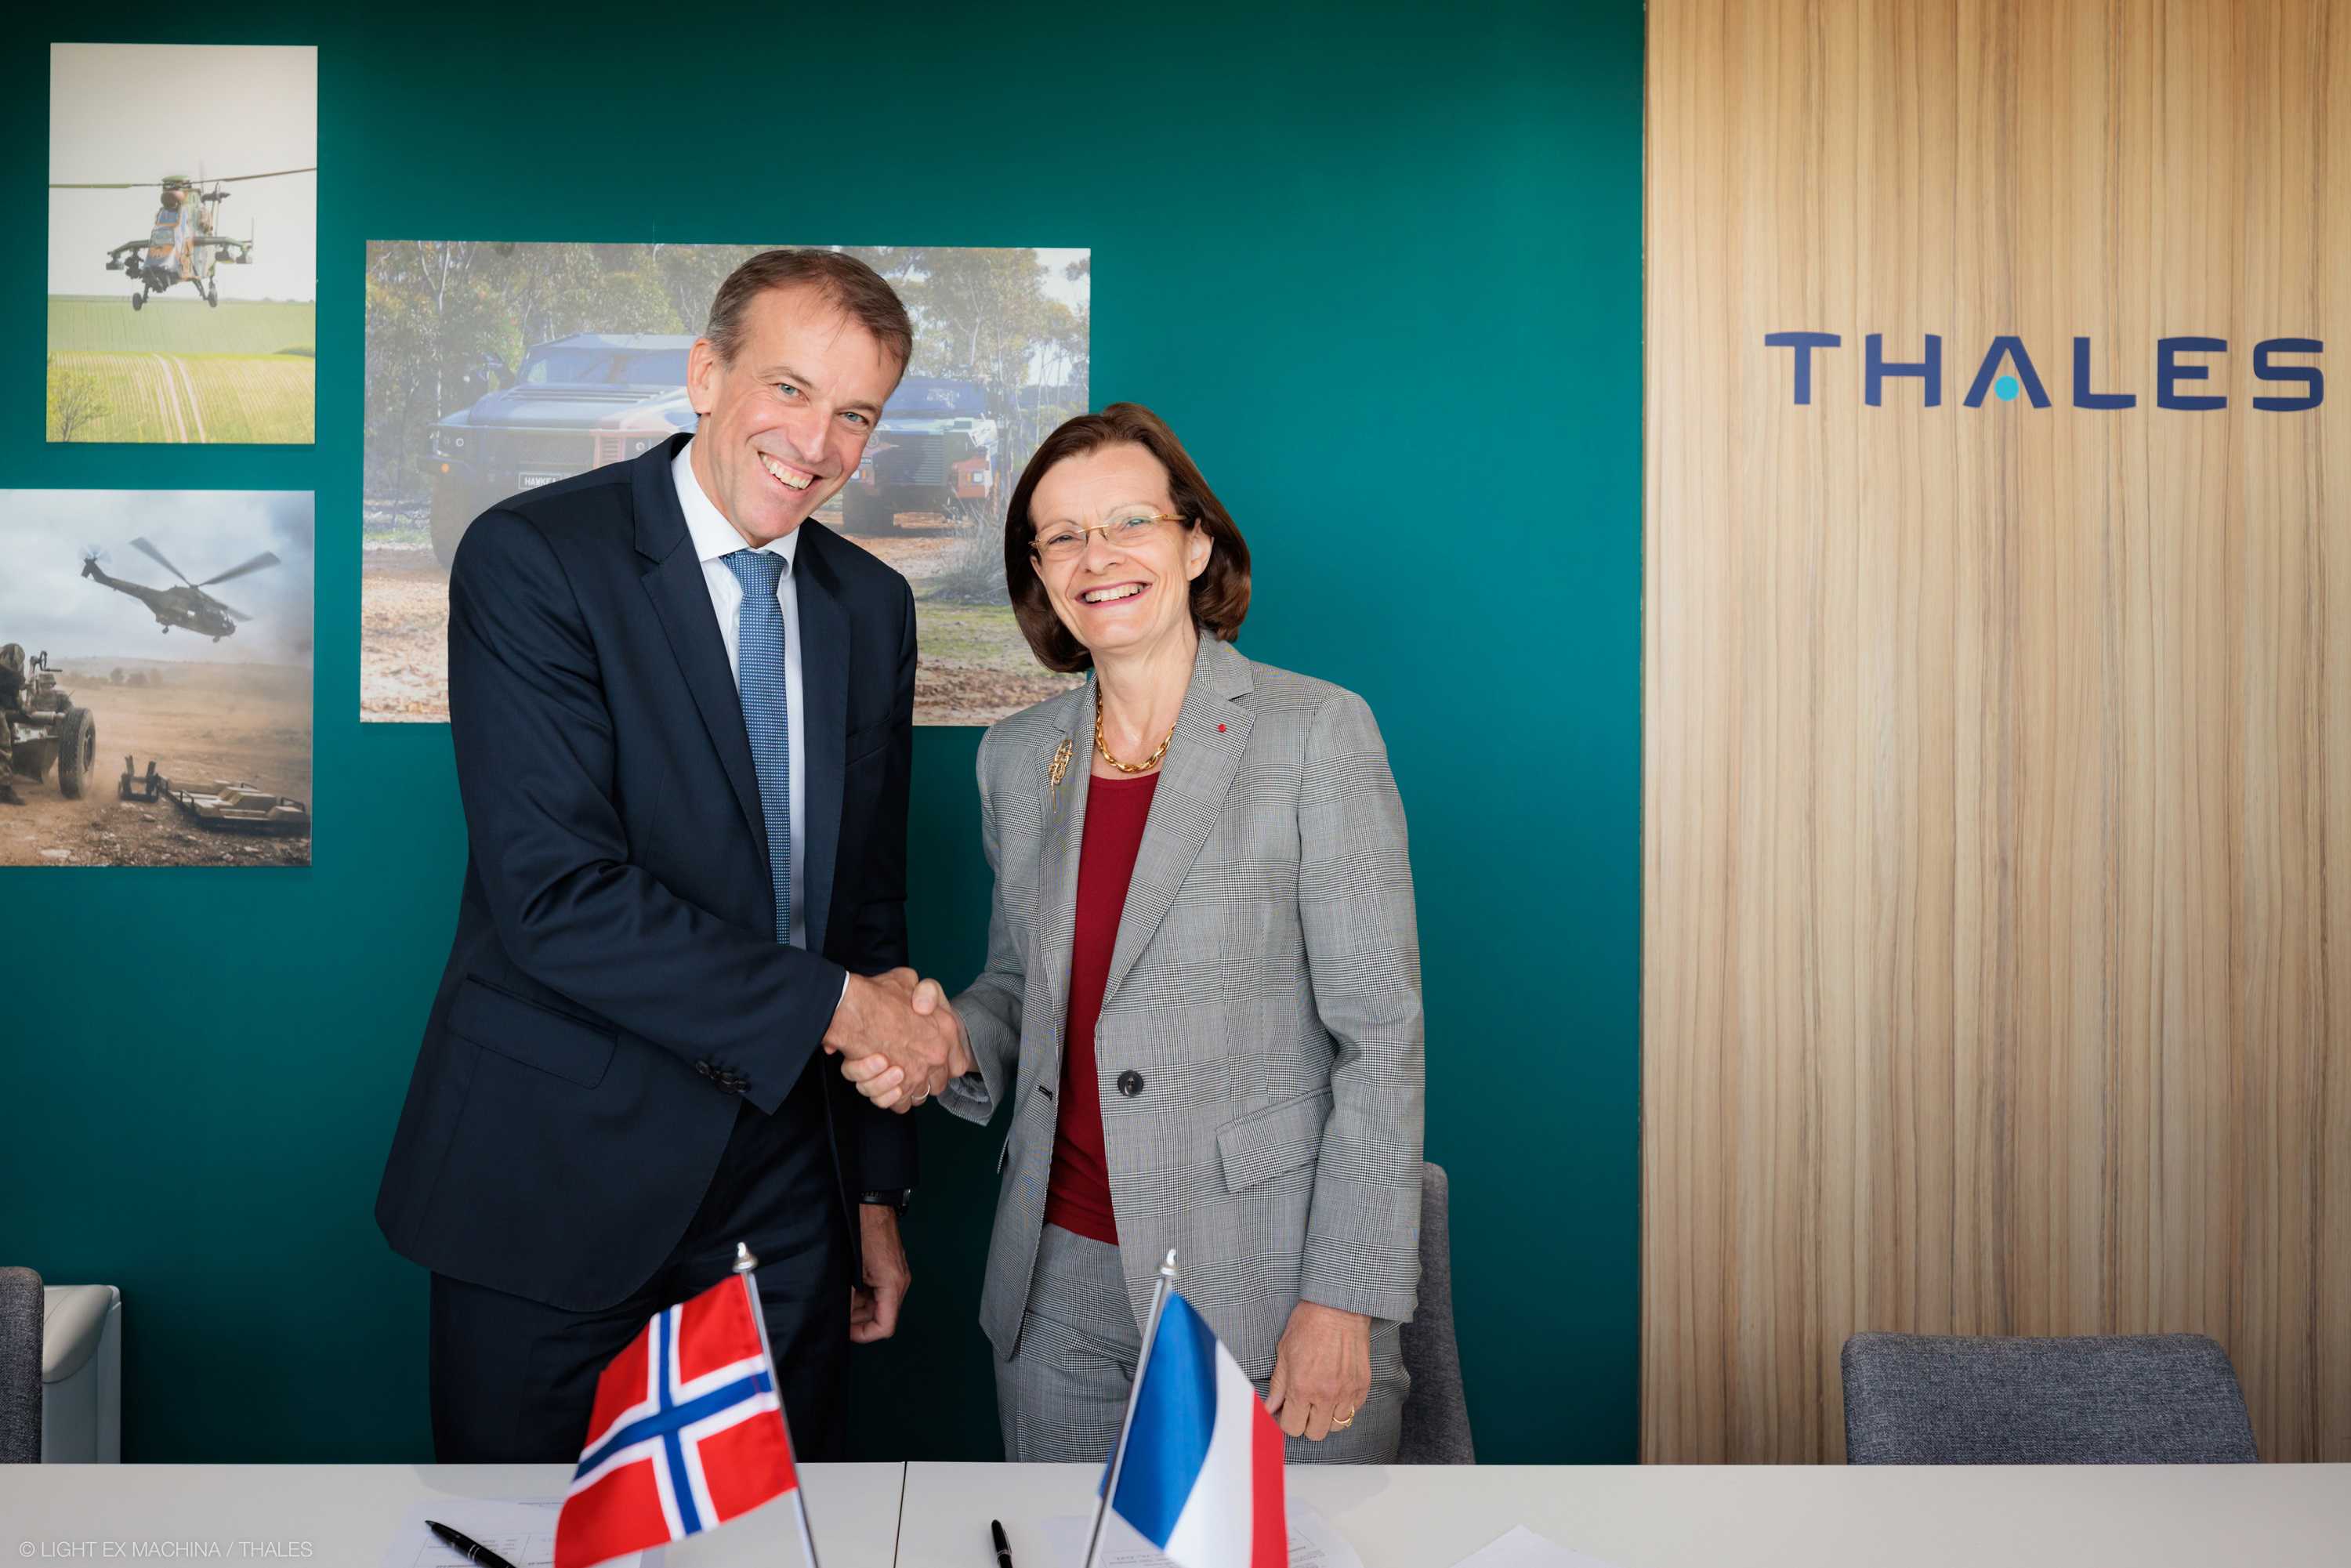 KONGSBERG and Thales signs strategic agreement